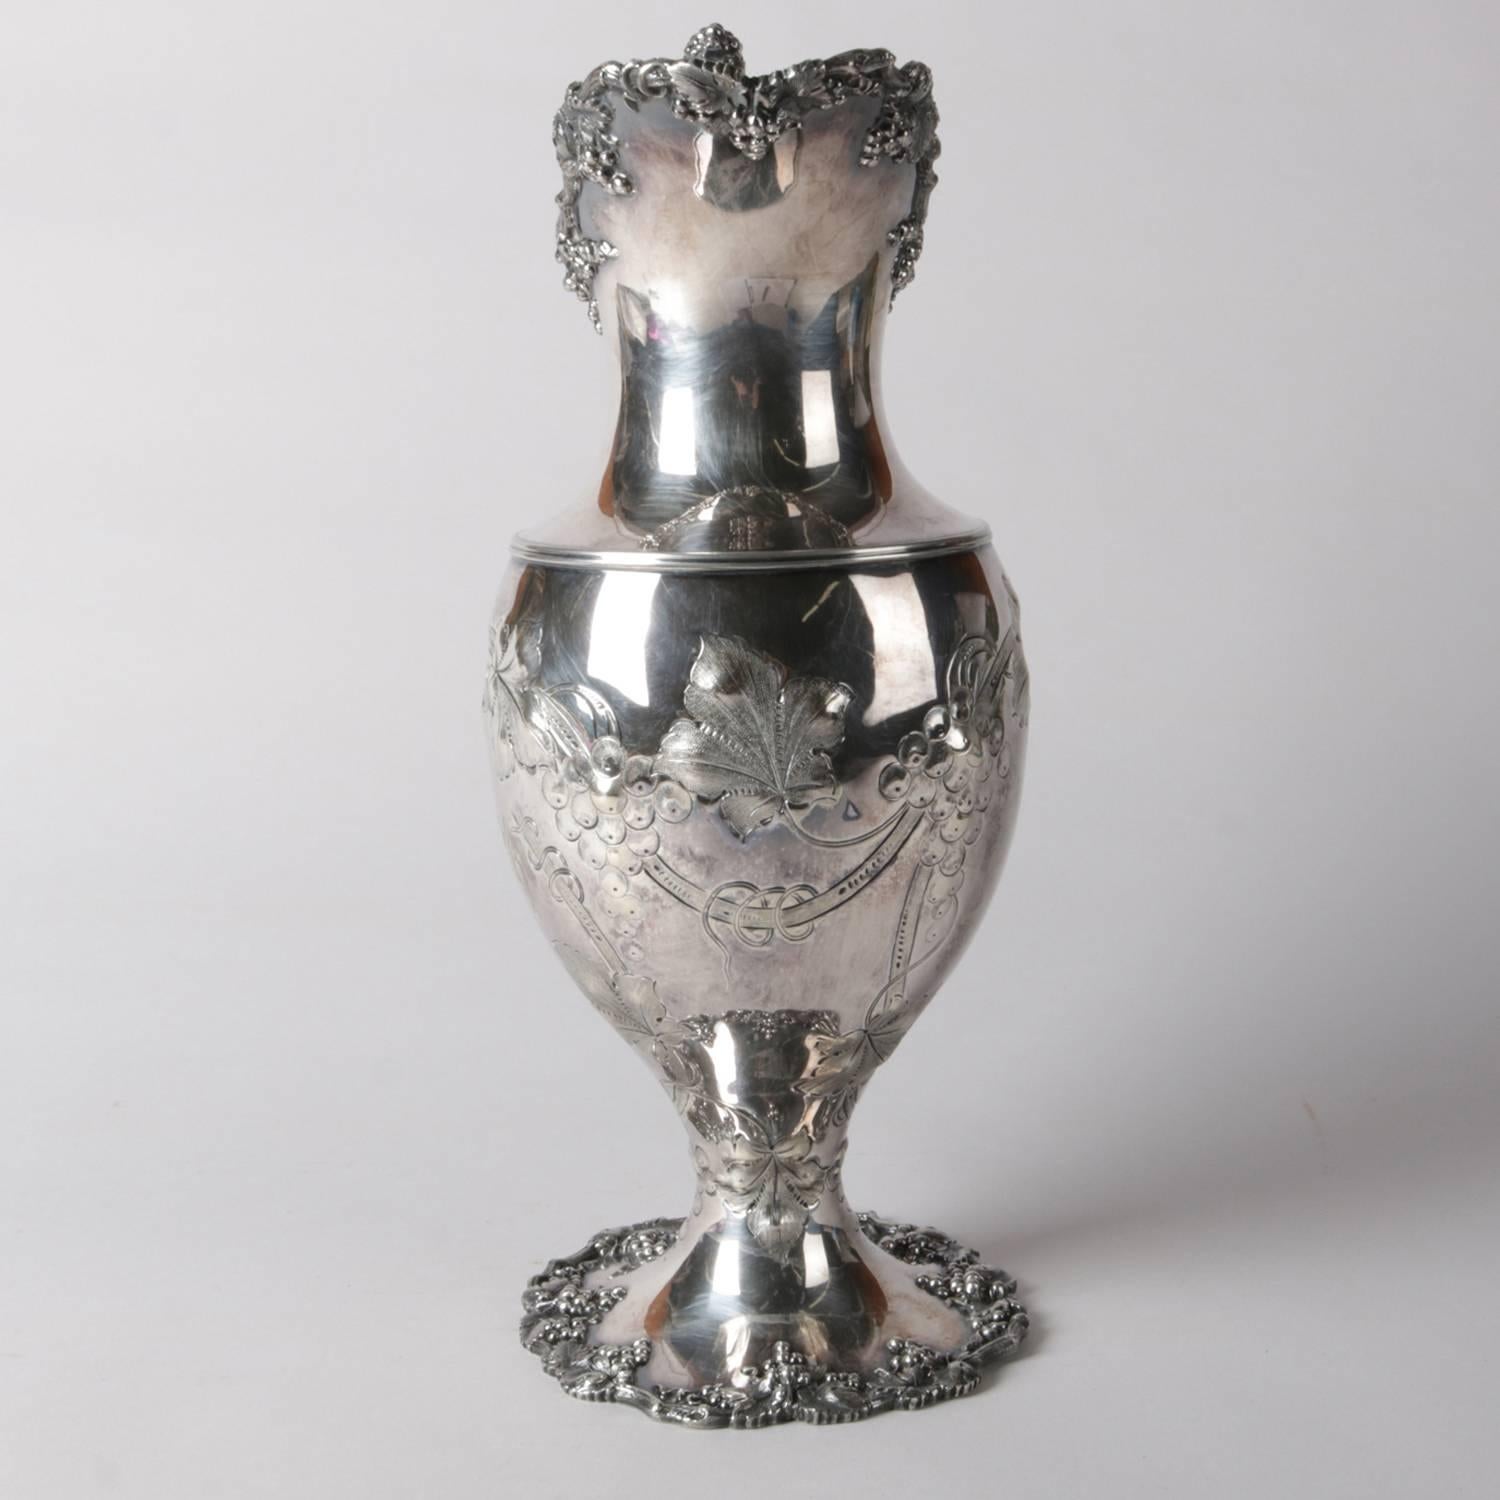 Victorian silver plate ewer (water pitcher) by Barbour Silver Co. features embossed foliate decoration on lip and foot, engraved orchid decoration on body with 